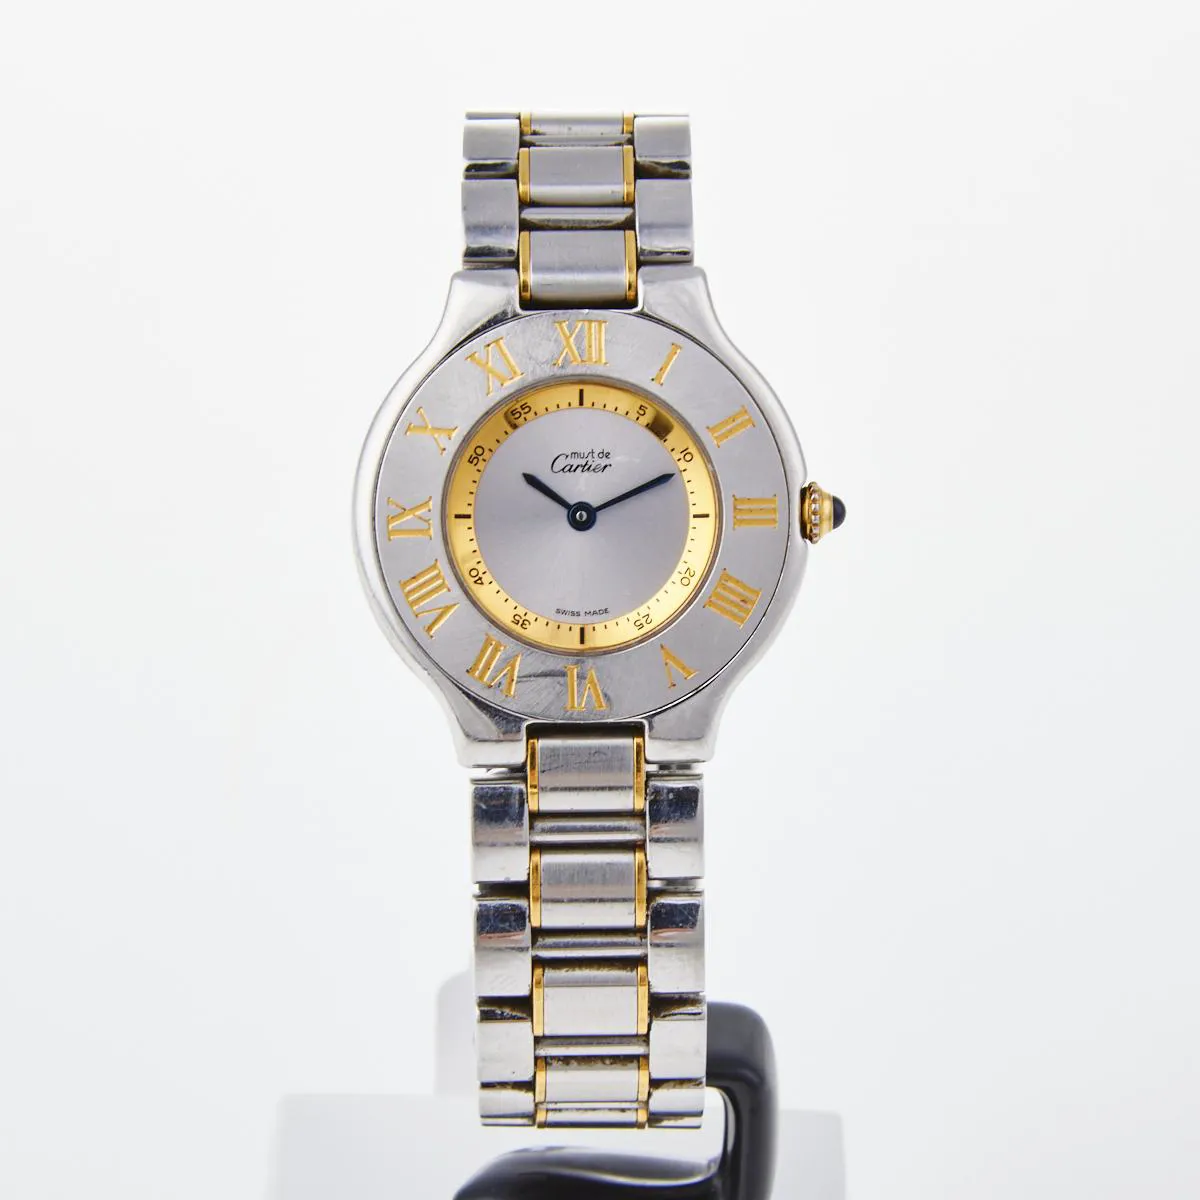 Cartier 21 Must de Cartier 1330 31mm Yellow gold and stainless steel Silver